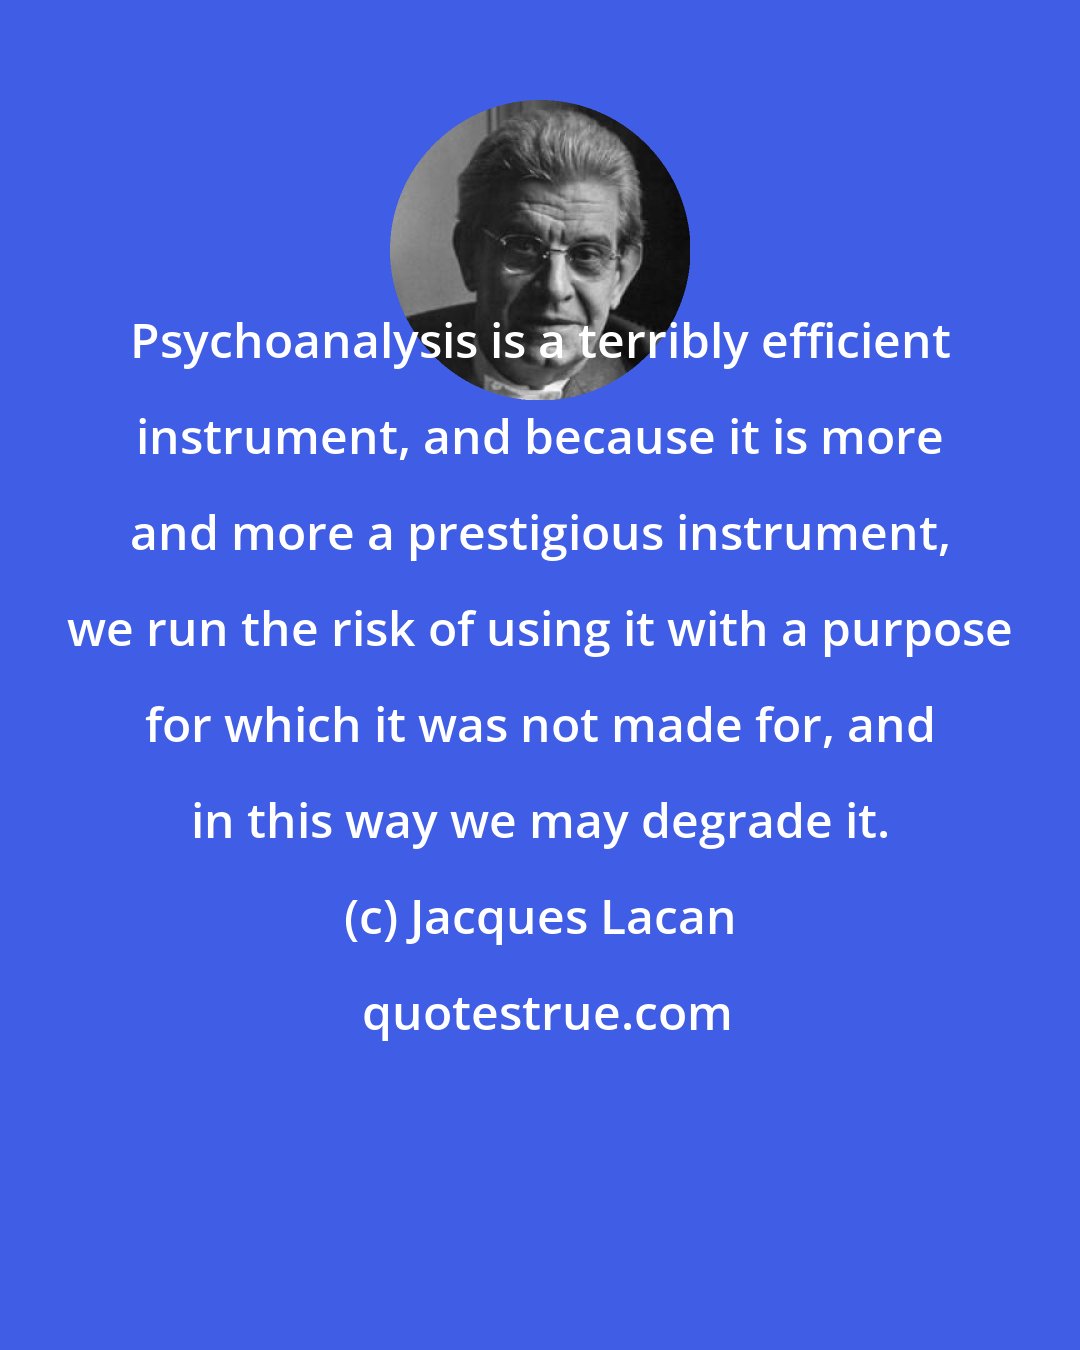 Jacques Lacan: Psychoanalysis is a terribly efficient instrument, and because it is more and more a prestigious instrument, we run the risk of using it with a purpose for which it was not made for, and in this way we may degrade it.